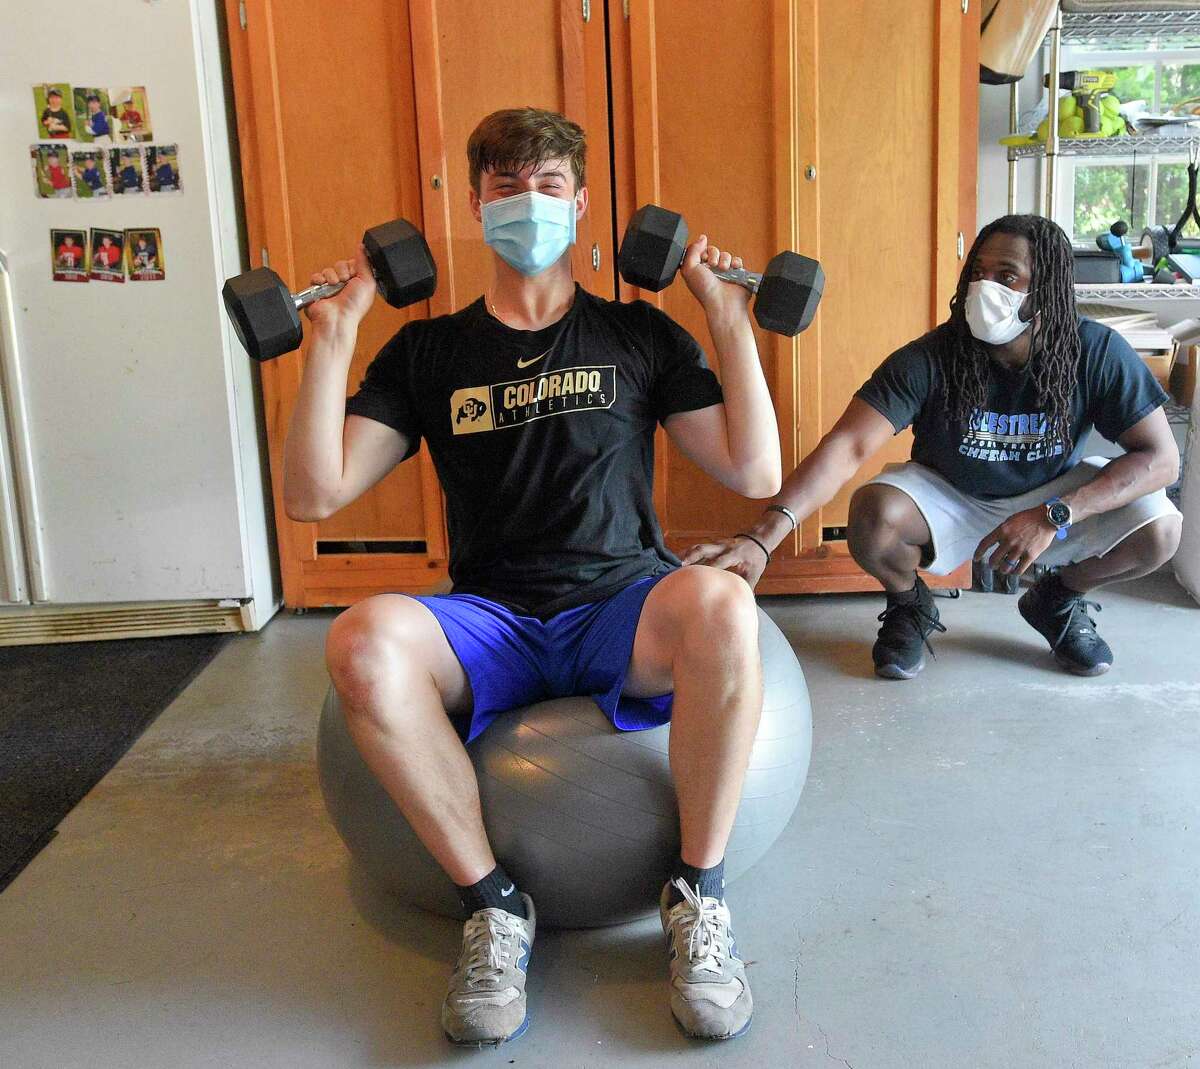 Ali Knott, at right, works with student athlete Ben Pennella, a Junior at Westhill High School at Pennella's workout studio set up in his families garage in Stamford, Connecticut on May 27, 2020. Knott, who left his position as the Strength and Conditioning coach with Westhill in the fall of 2019, to devote more time to his current employer BlueStreak Sports Training of Stamford, works with other student athletes in a virtual workout format, but often visits athletes for a one to one workout in a socially acceptable distancing session. Today's session consisted of working the upper and lower parts of the body, using weights, resistant bands, and weight ropes. Each student keeps a log of their workouts, that can be reviewed and modified to meet each individual strengths.